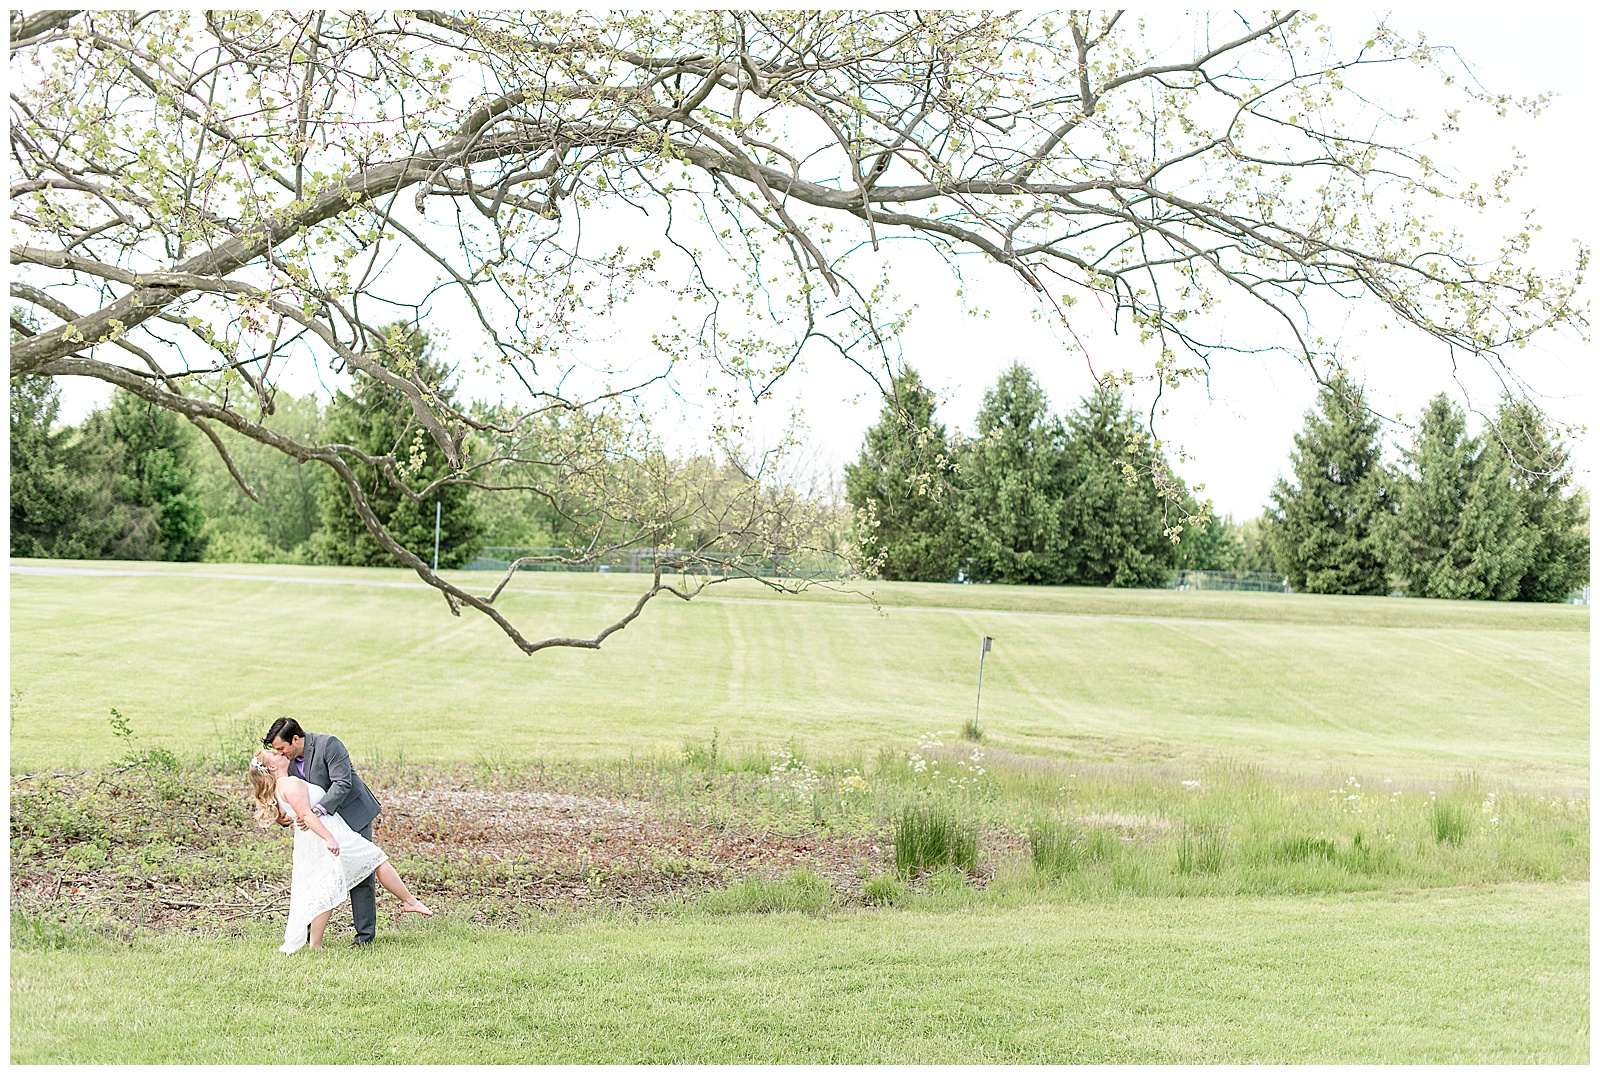 groom dipping bride under large curving tree branch